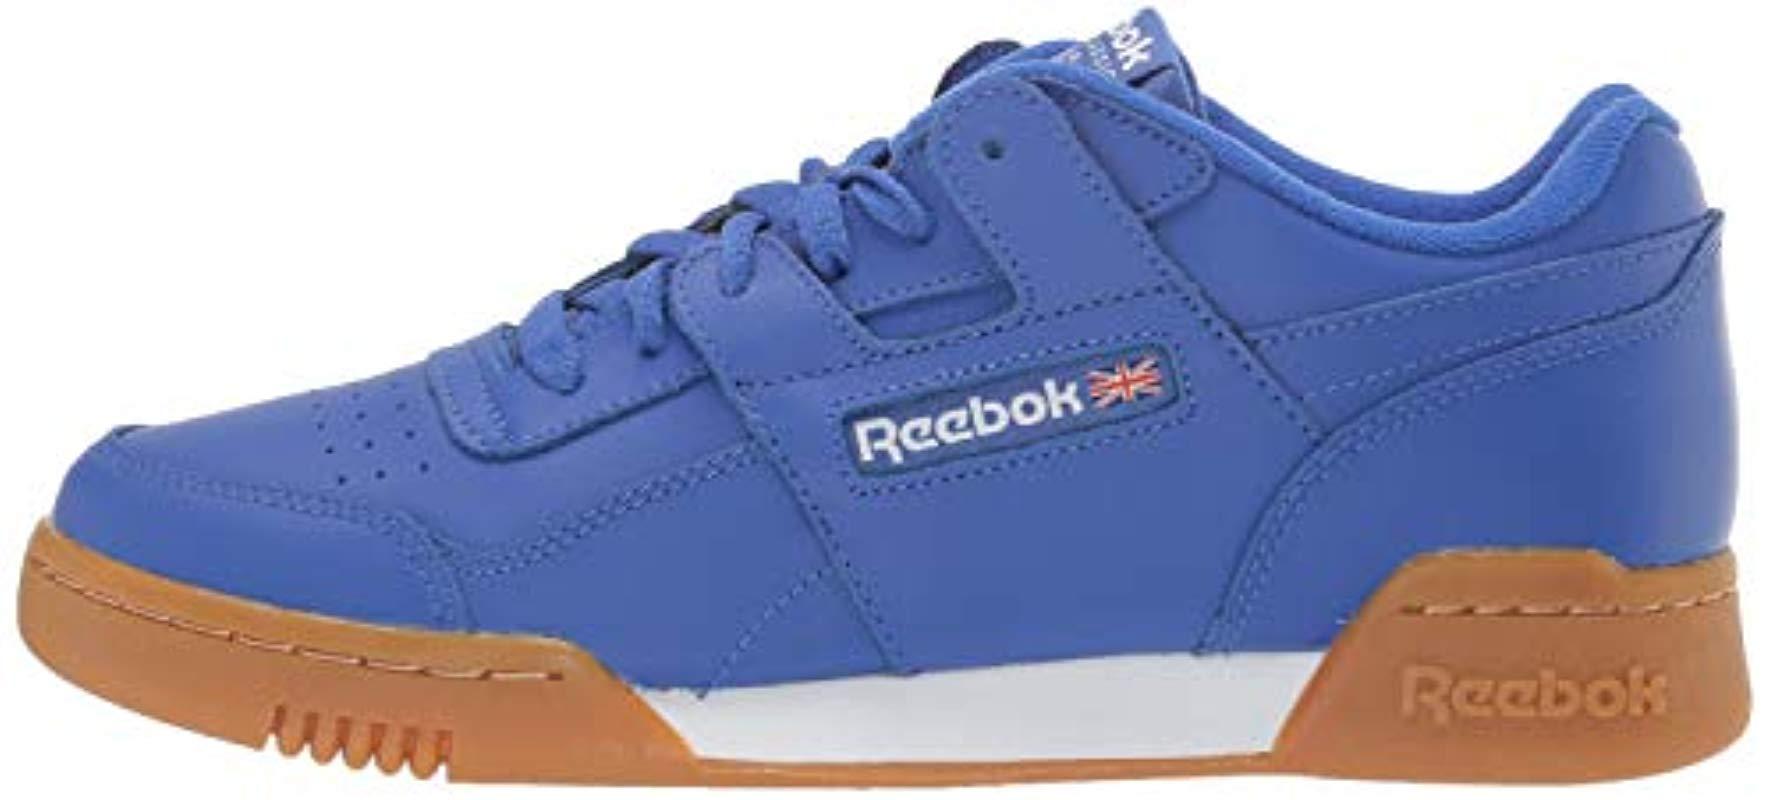 Simple Reebok workout plus blue gum with Comfort Workout Clothes